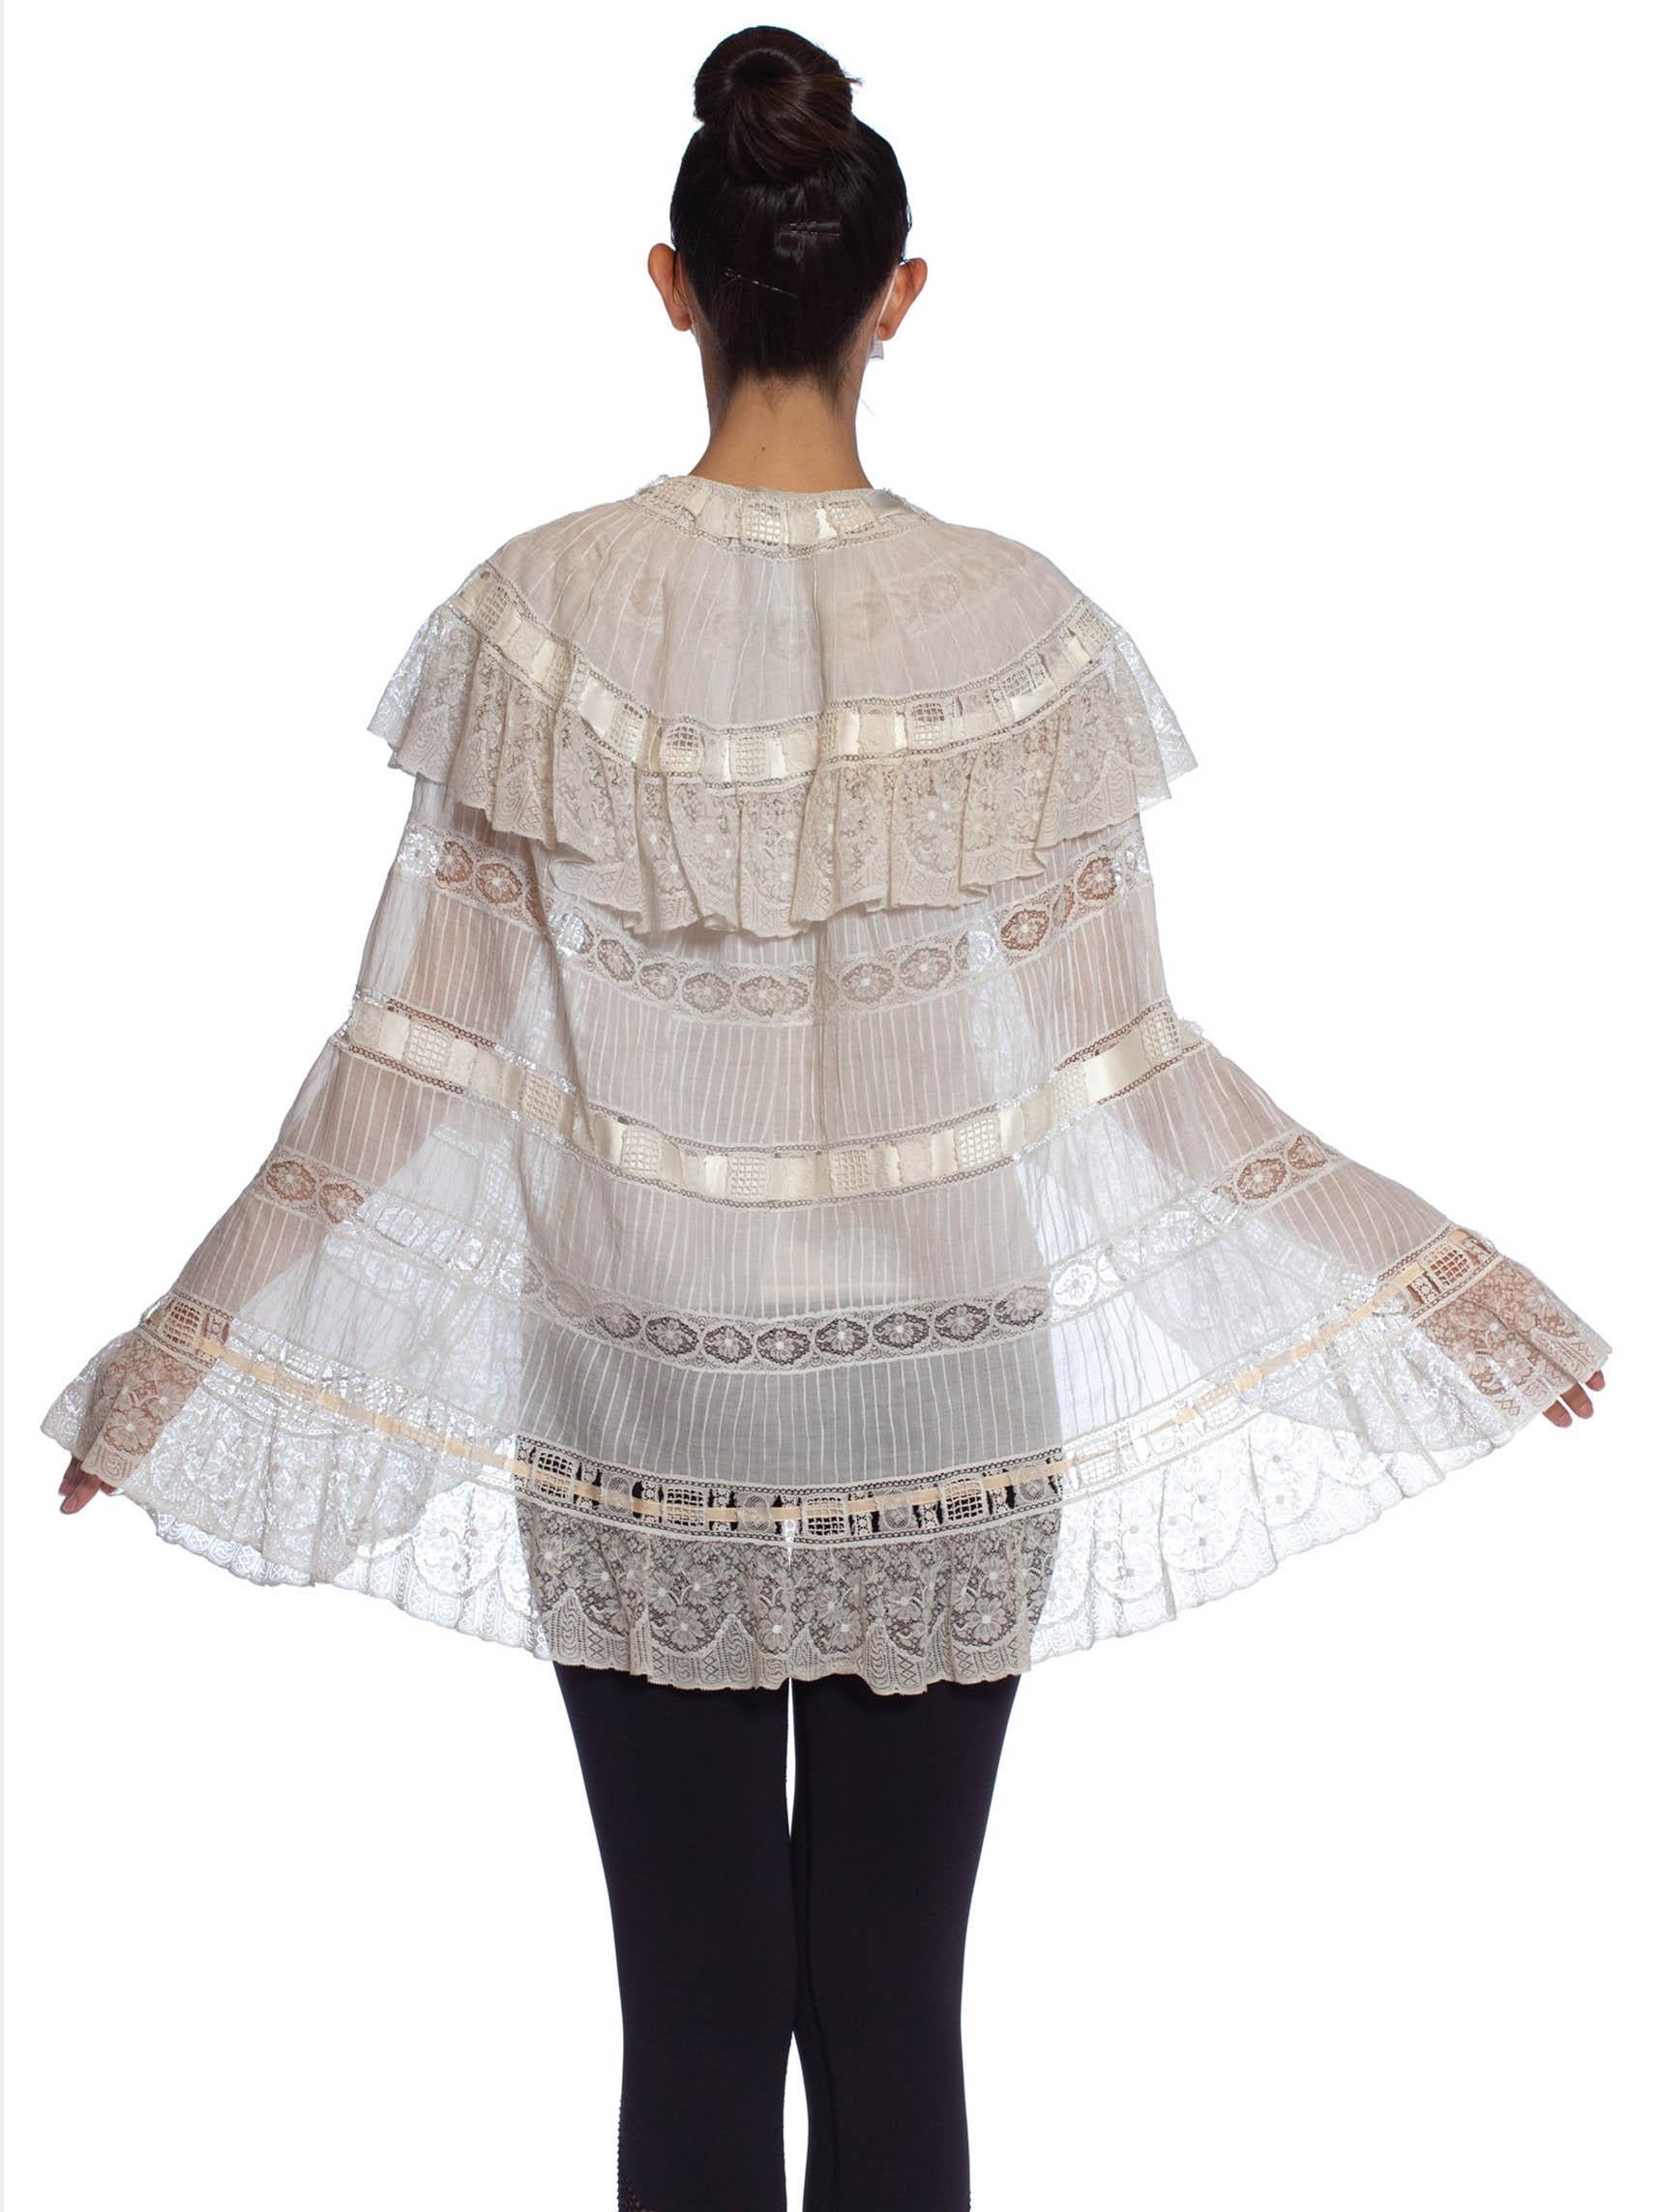 Women's Victorian White Cotton Voile & Lace Cape Entirely Pin-Tucked By Hand From Paris For Sale